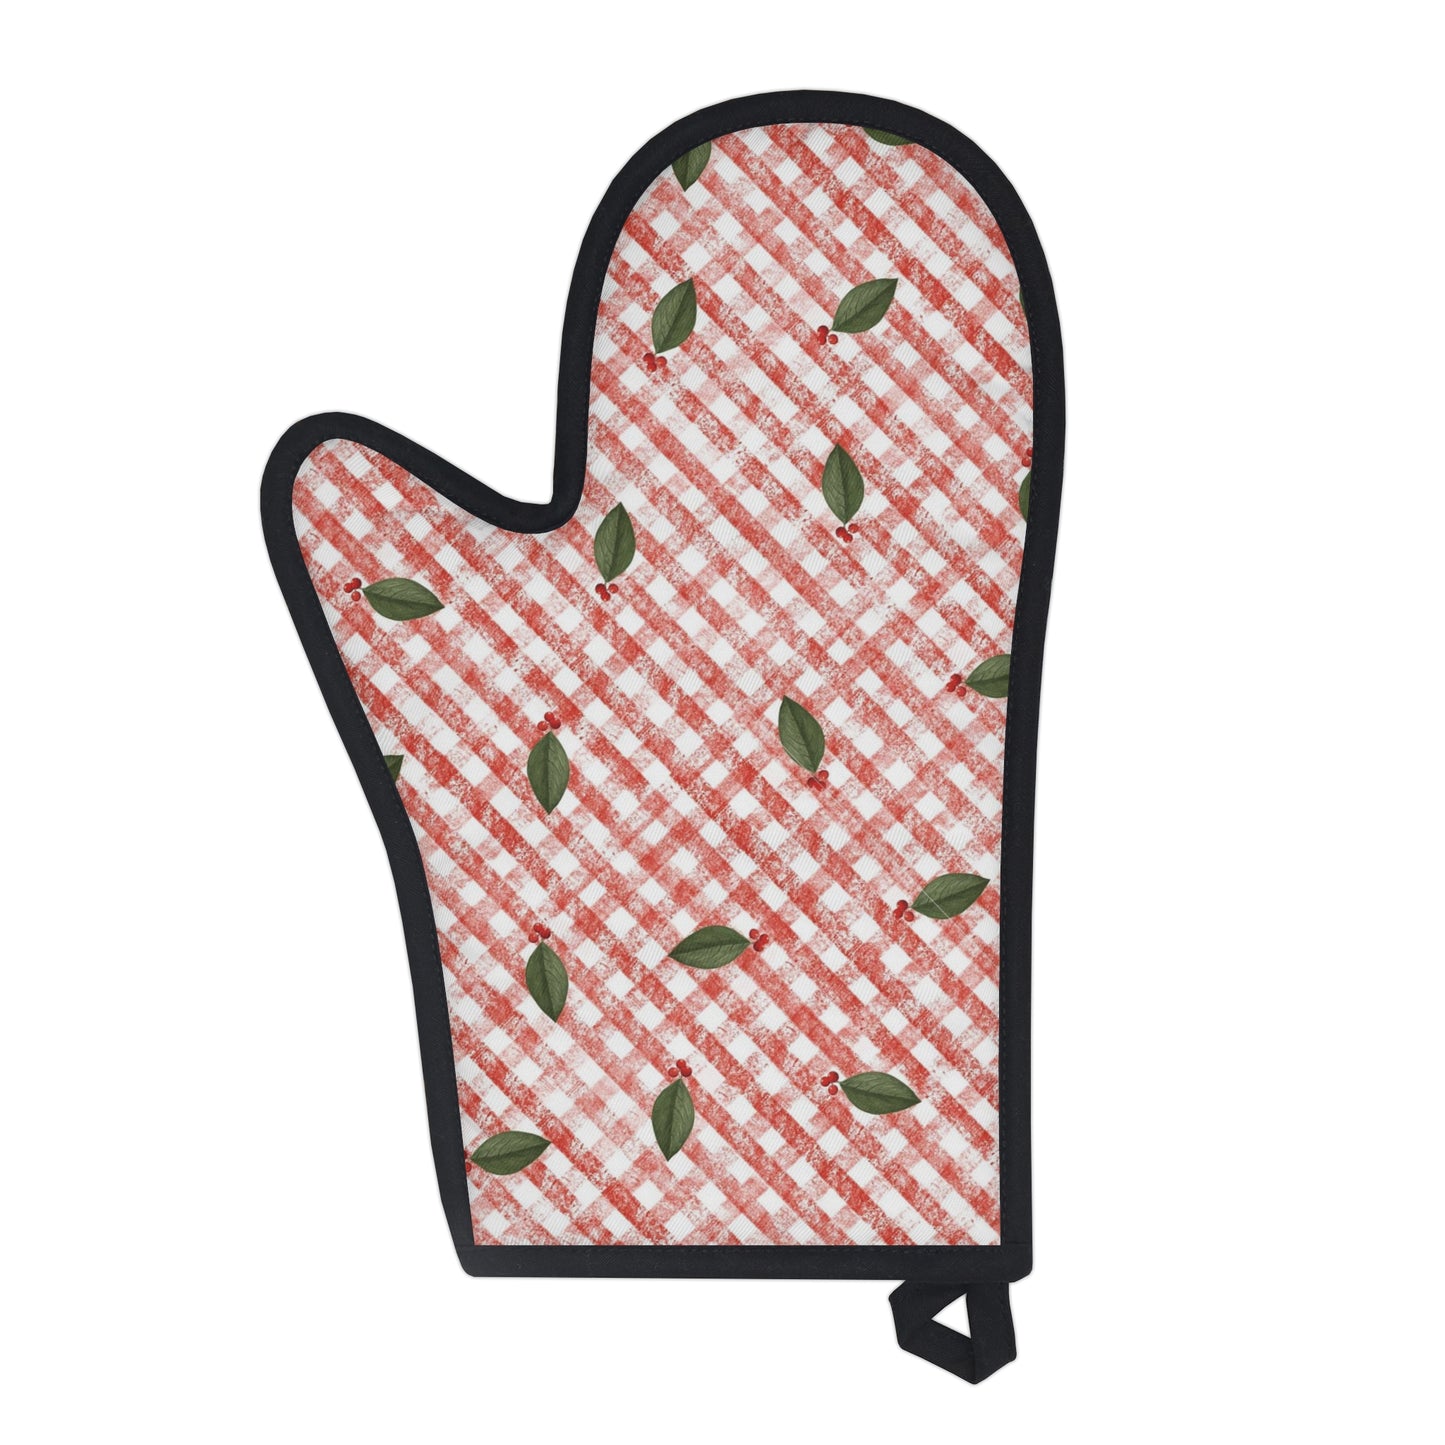 Red & White Gingham Oven Glove